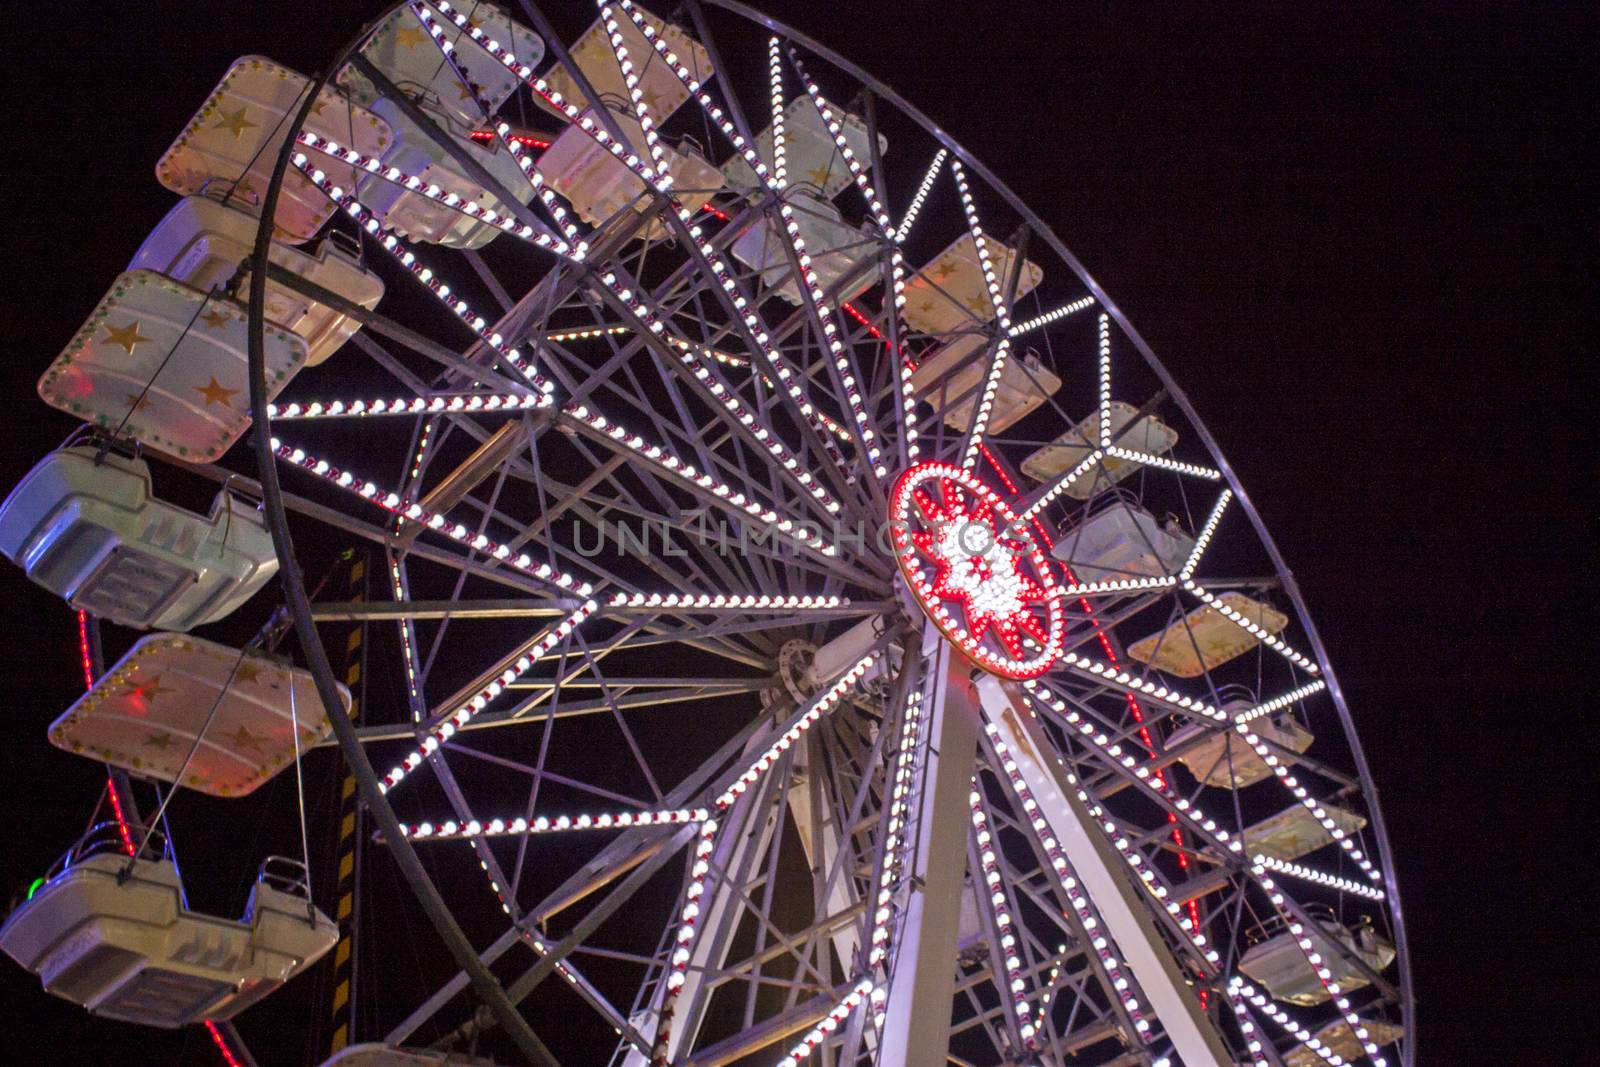 Ferris wheel in an amusement park in northern Italy.